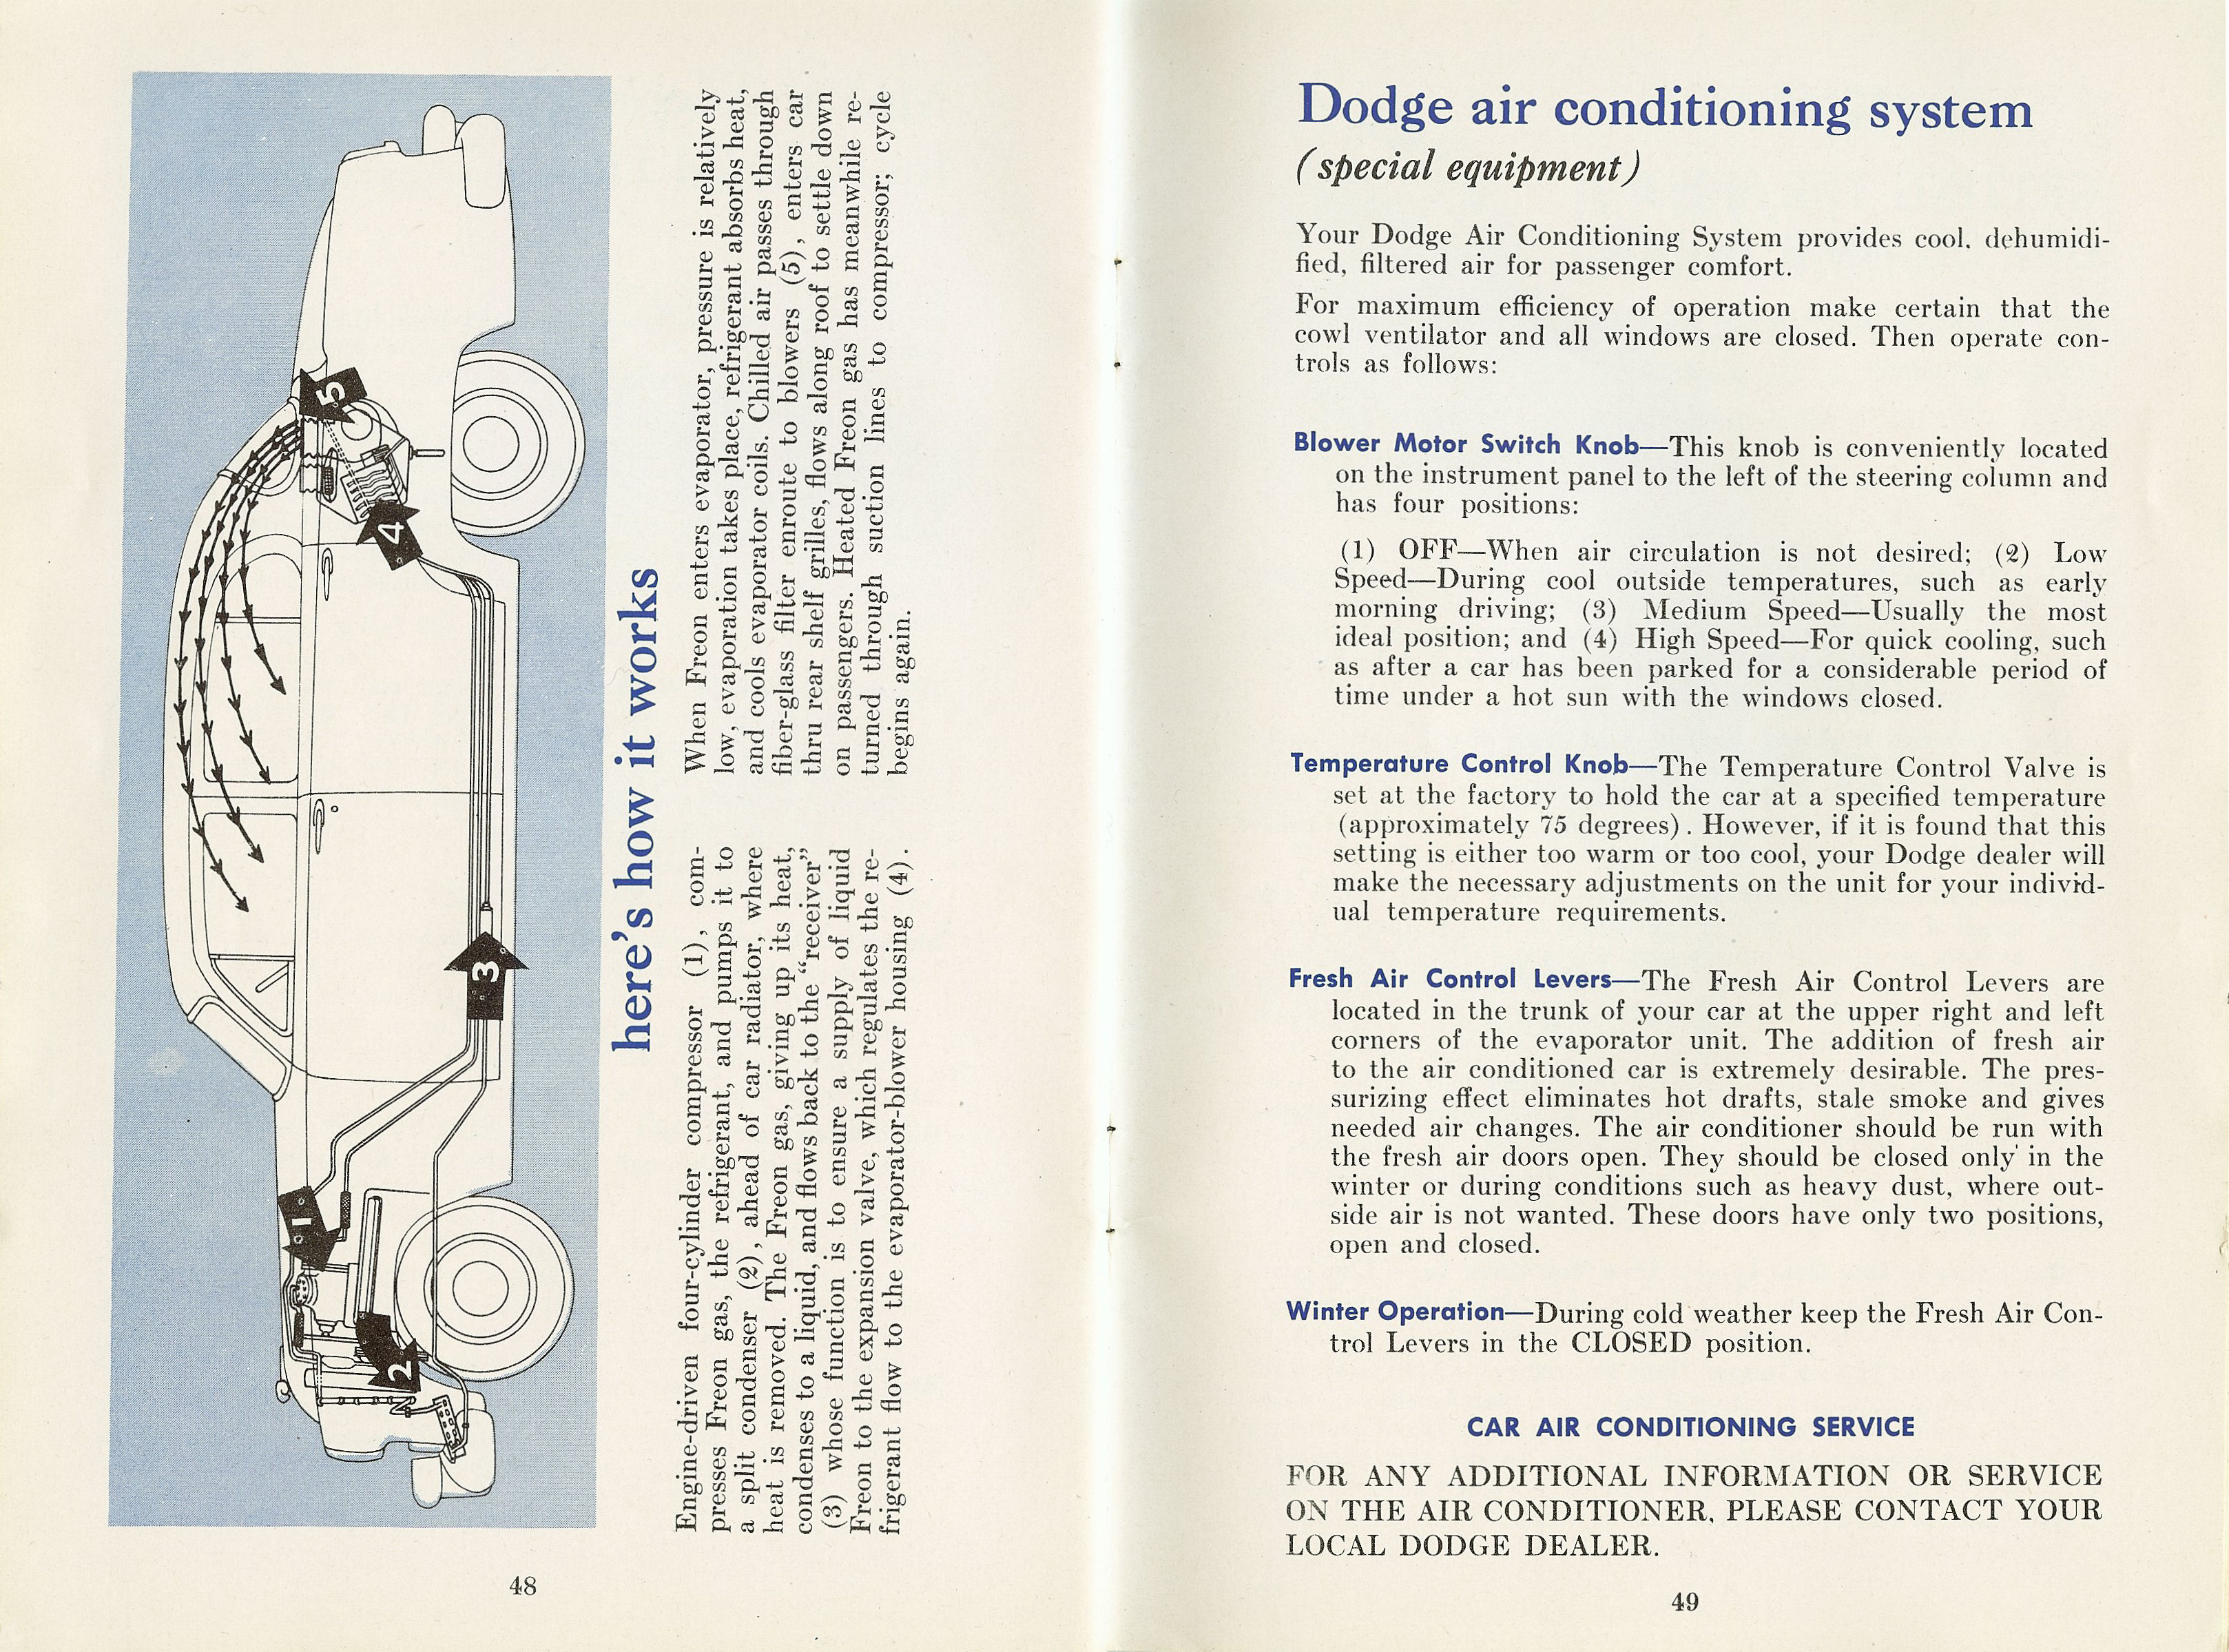 1954 Dodge Car Owners Manual Page 1